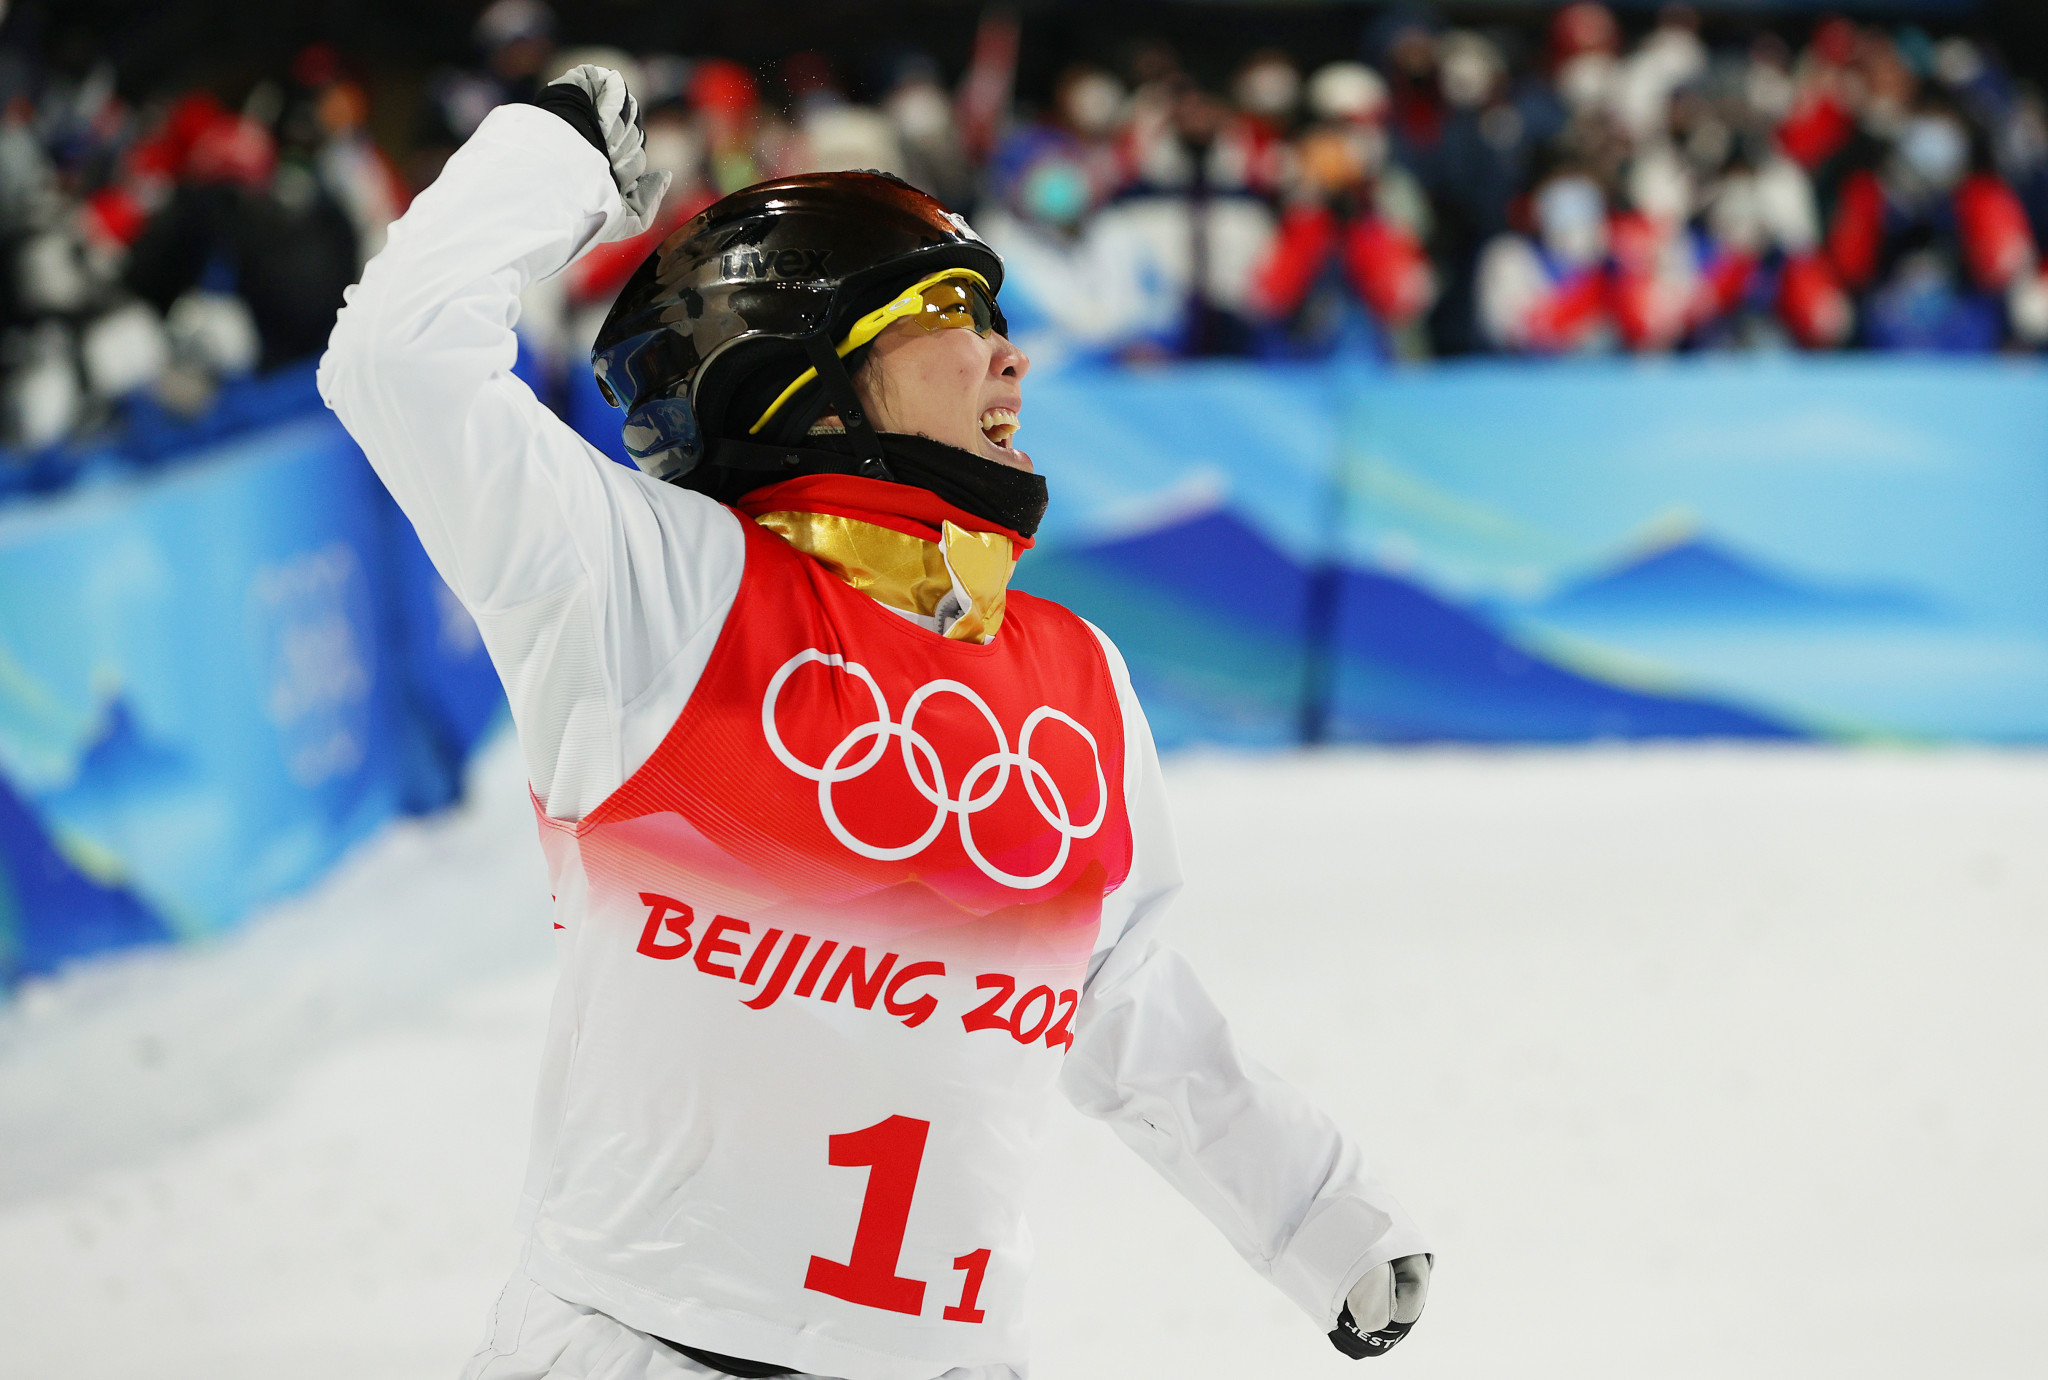 Xu Mengtao became the first Chinese Olympic gold medallist in aerials at Beijing 2022 ©Getty Images